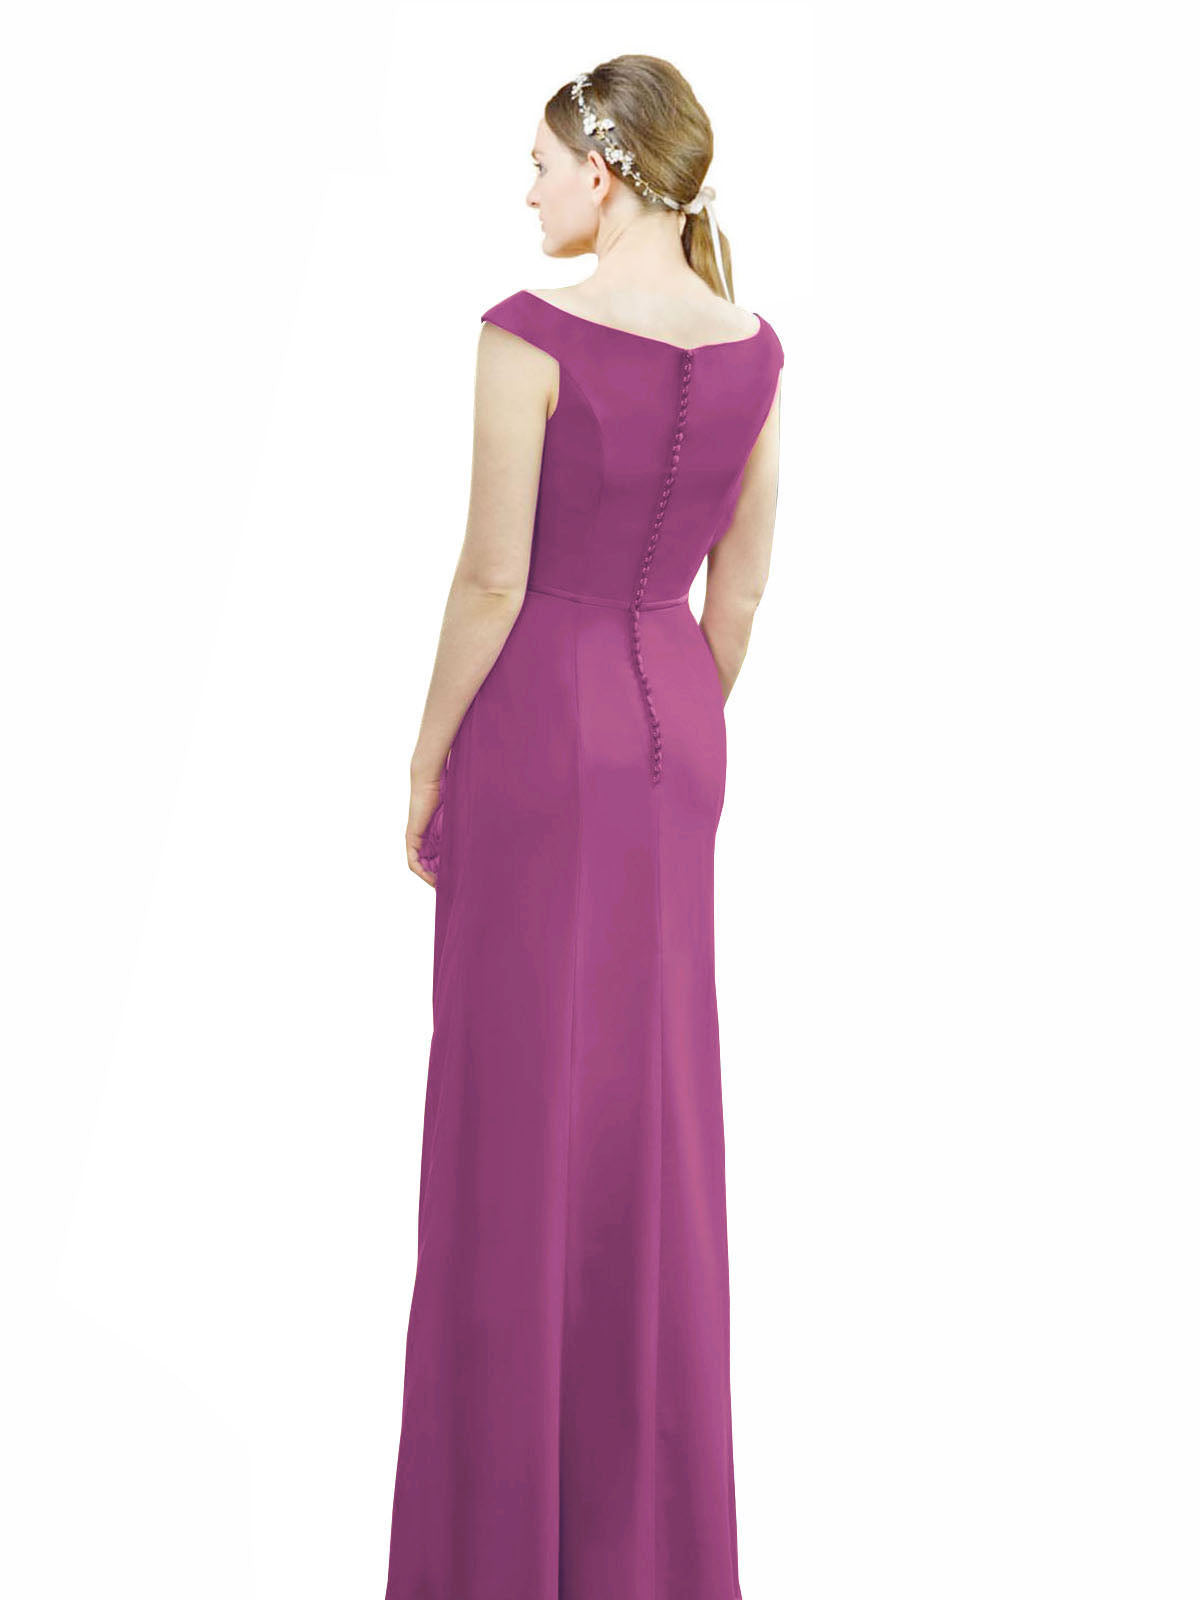 Wild Berry Mermaid, Fit and Flare Bateau, High Neck Sleeveless Long Bridesmaid Dress Emilee 